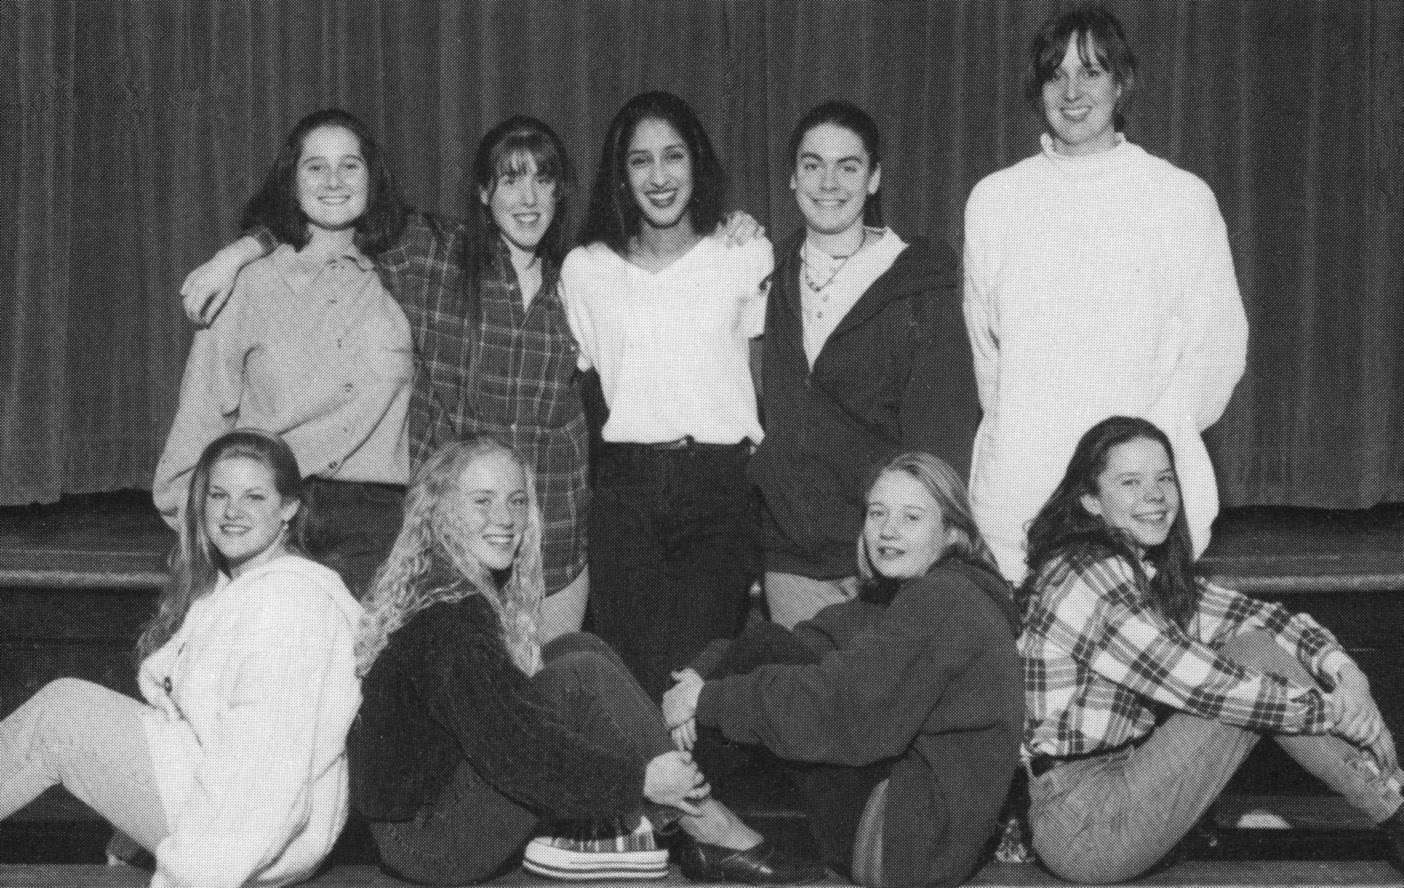 (Click to magnify) FRONT ROW: Sarah Armstrong, Jill Ballinger, Sarah Vinnels; SECOND ROW: Beverly Cornish, Lindsay Connell, Tina Dejak, Stephanie Smith, Mrs. MacKenzie; ABSENT: Sara Dart, Laura Grant, Carrie Reinhardt.